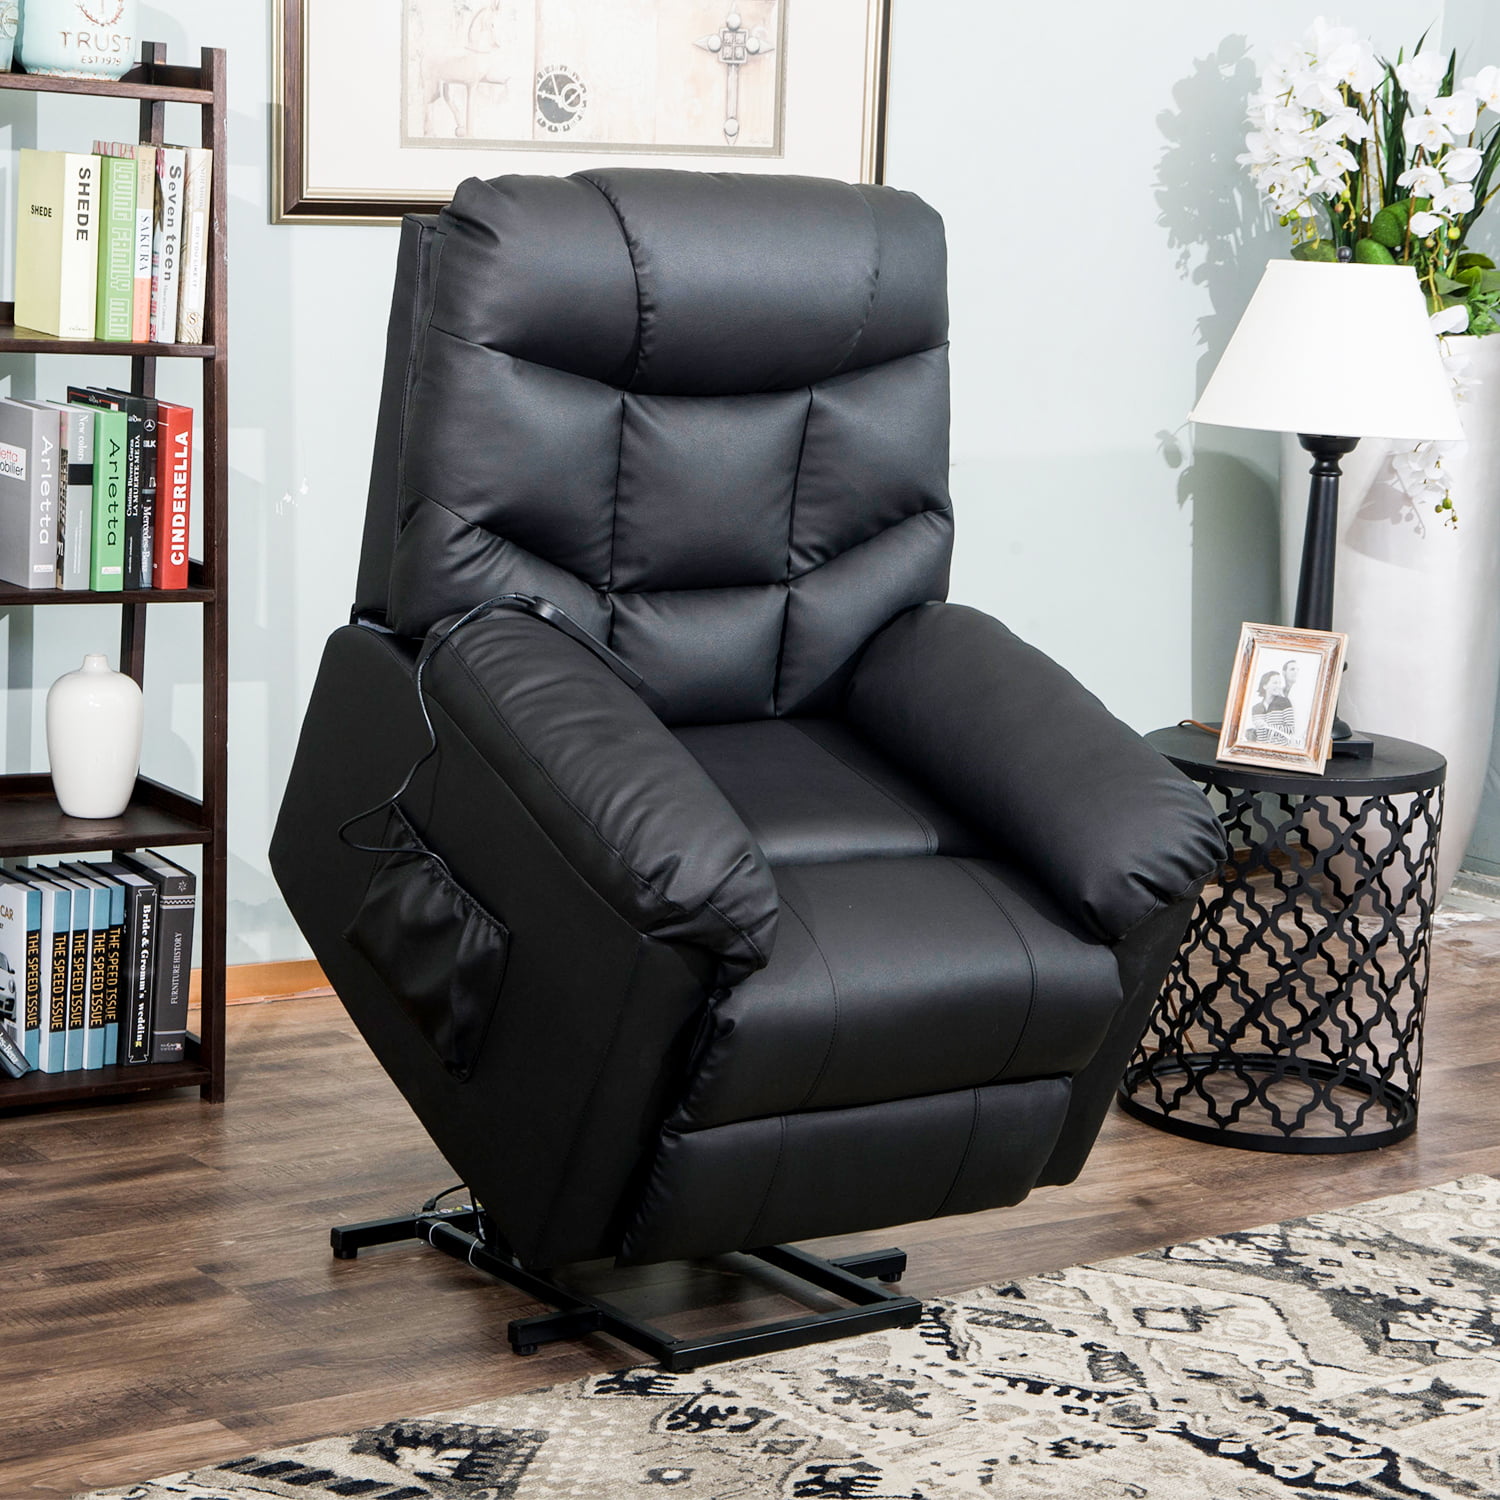 Leather Power Lift Recliner Chair with Remote Control, SEGMART PU